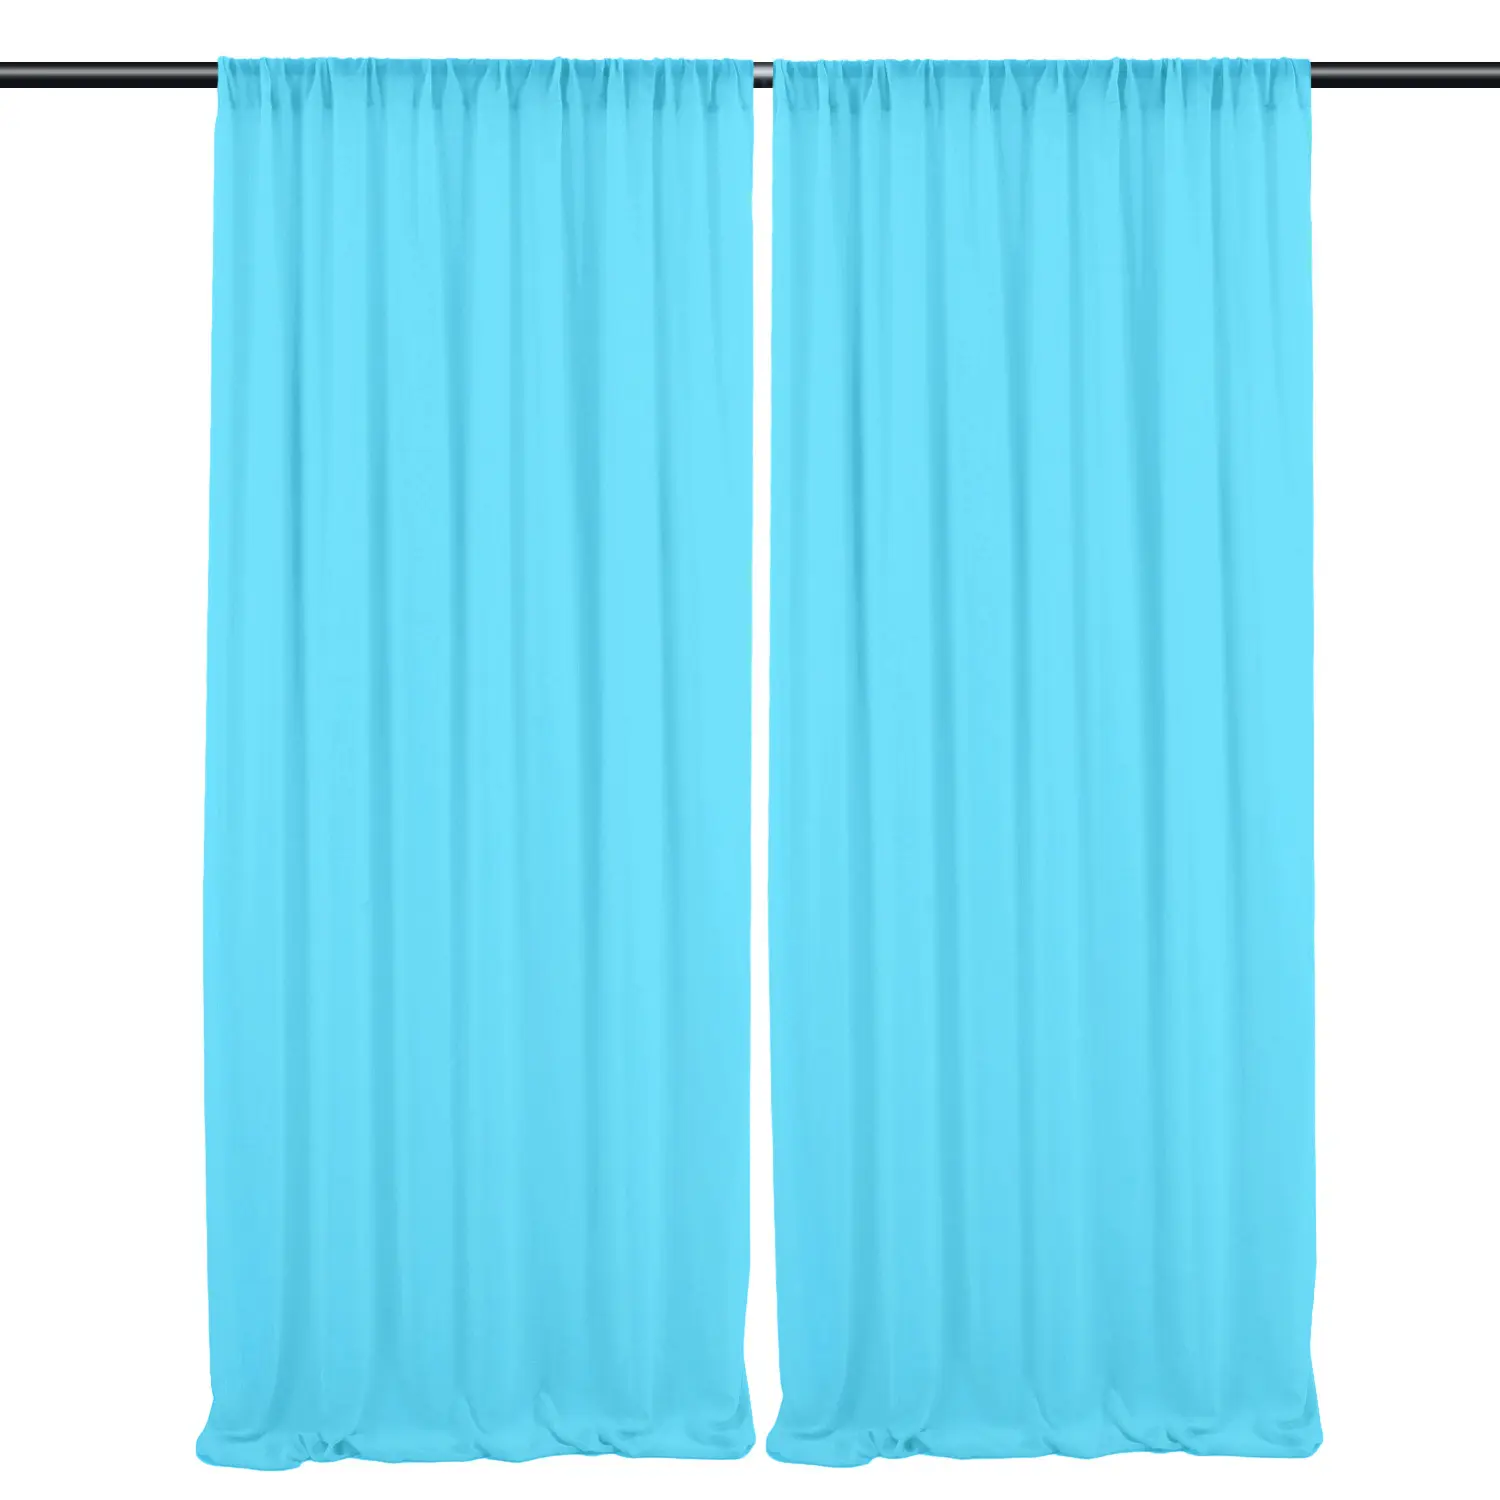 5Ftx10Ft Event Drapes Wedding Party Home Decorations Polyester Backdrop Drapes Curtains Panels